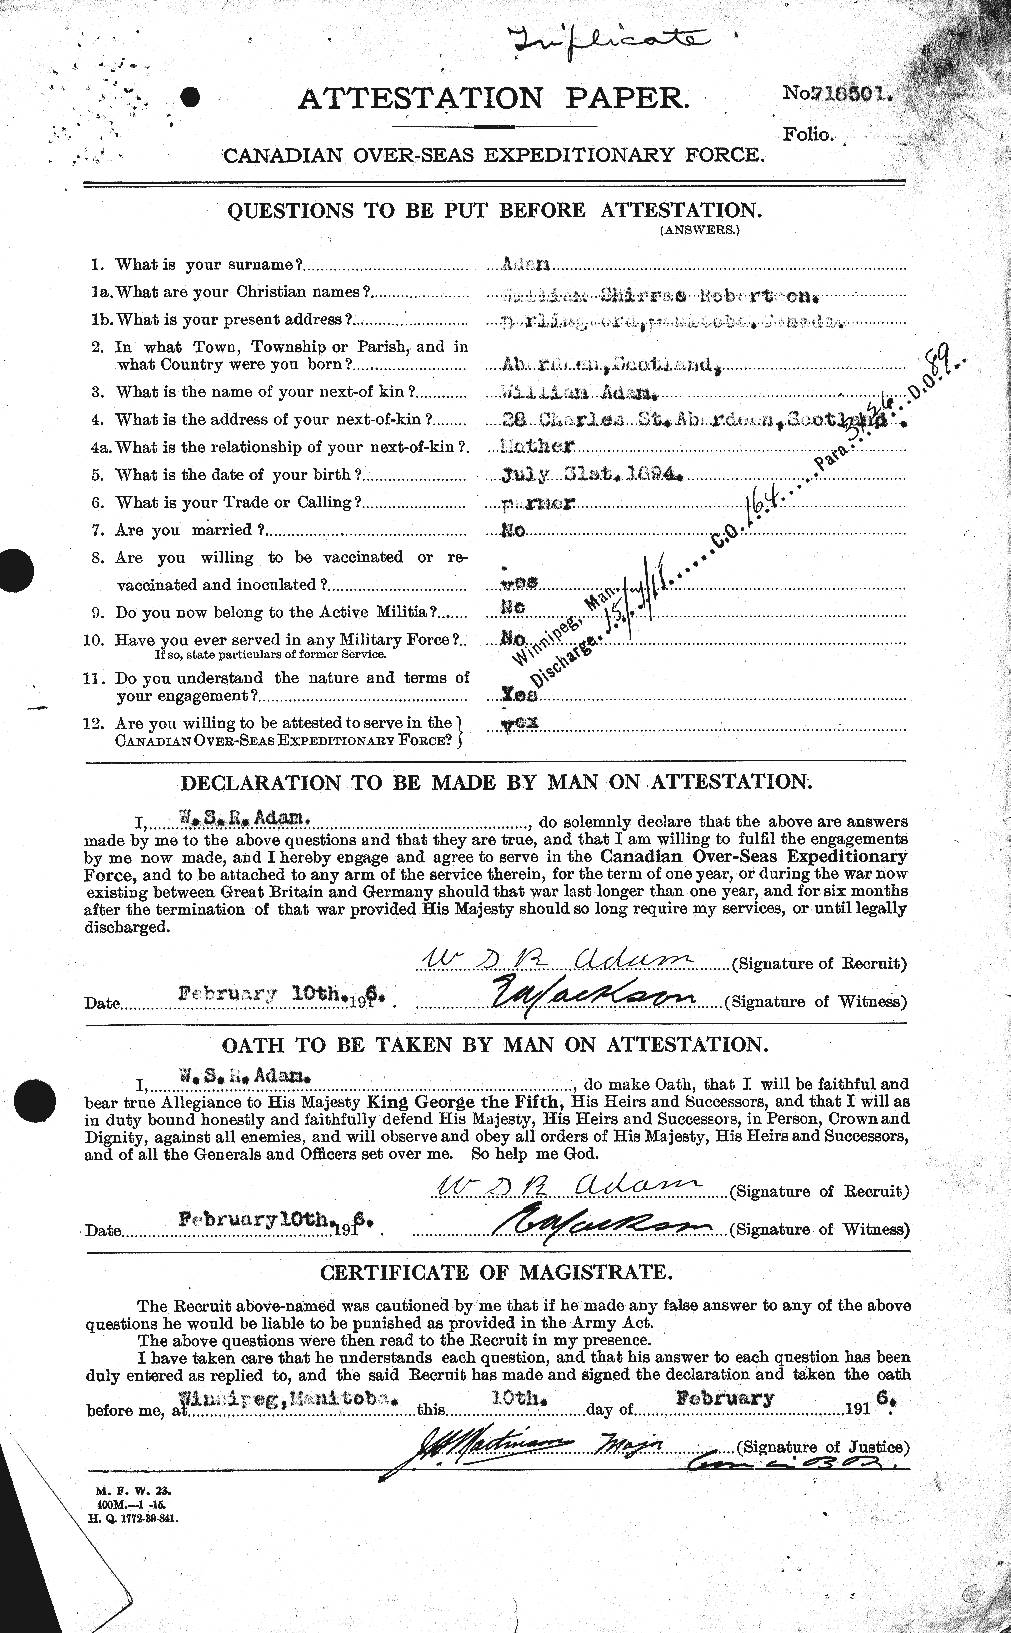 Personnel Records of the First World War - CEF 201340a